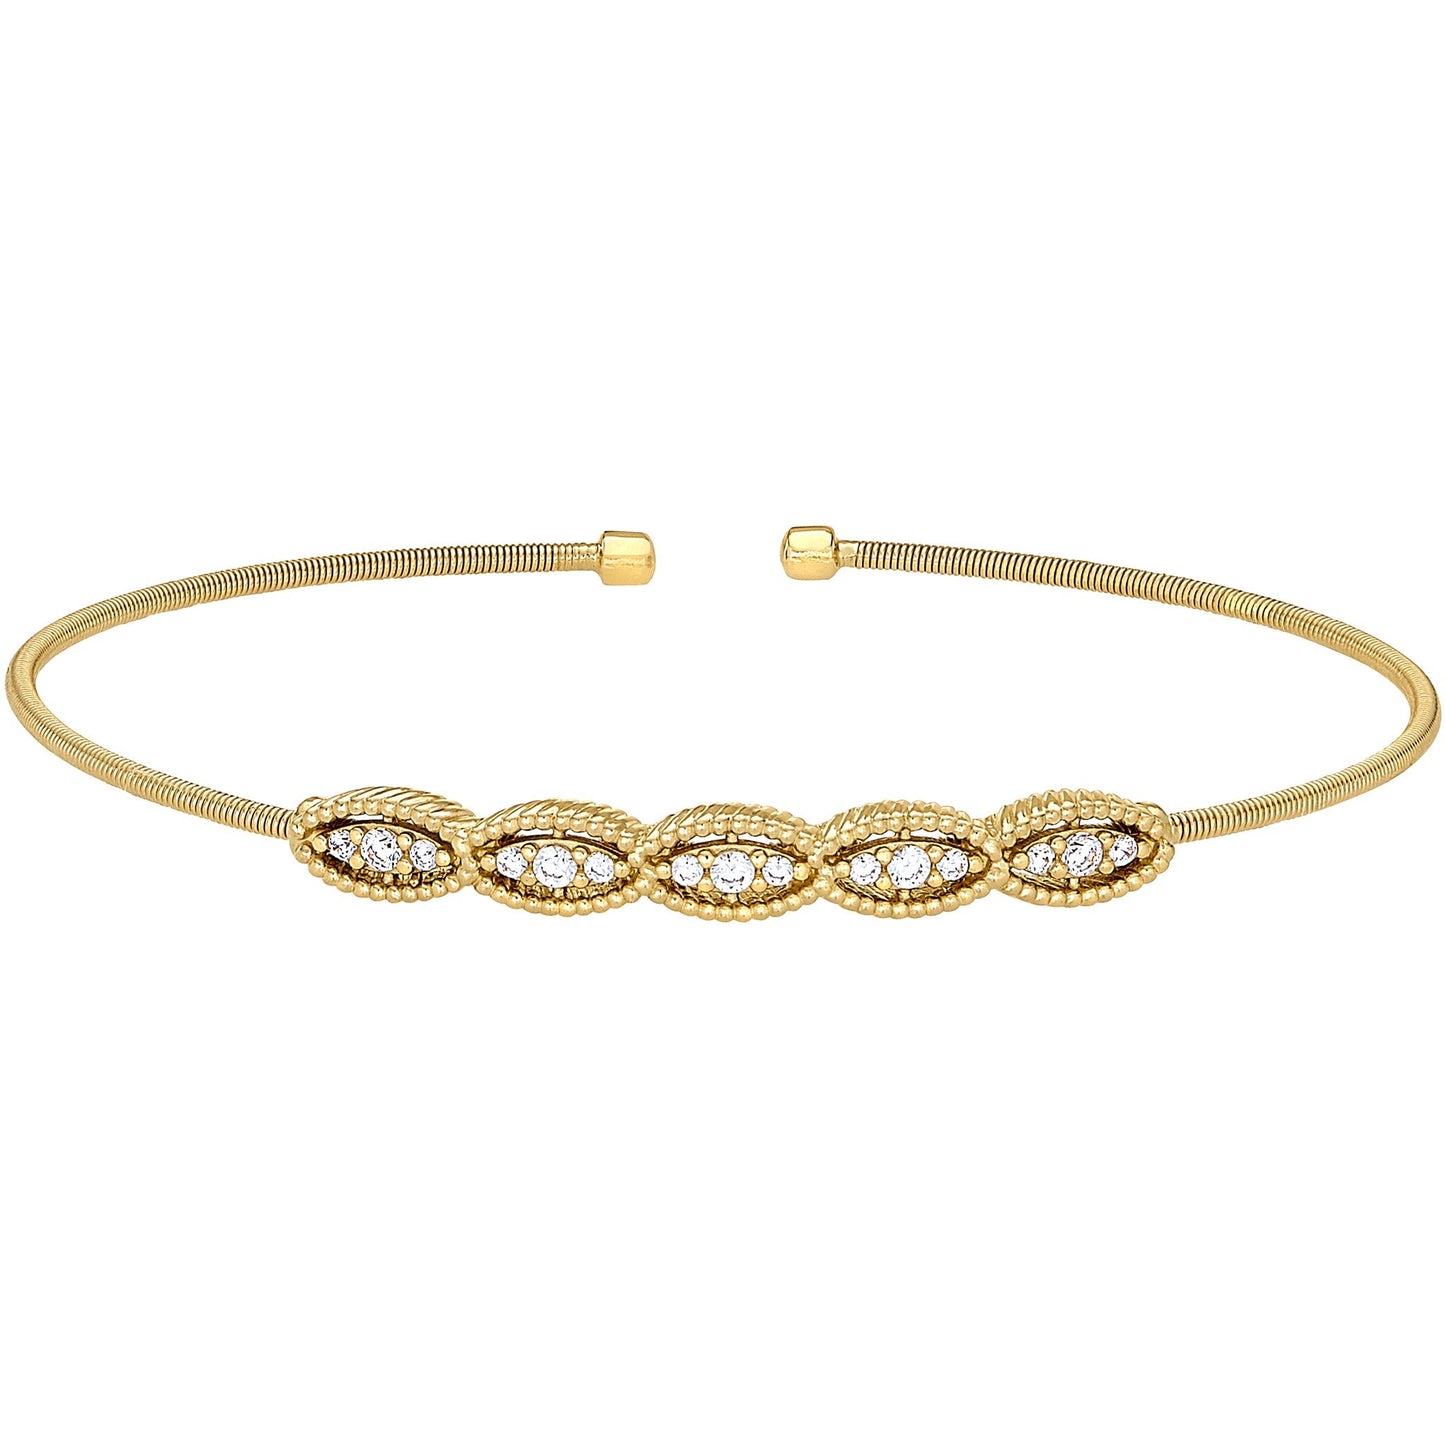 A cable bracelet with marquise shaped simulated diamond displayed on a neutral white background.